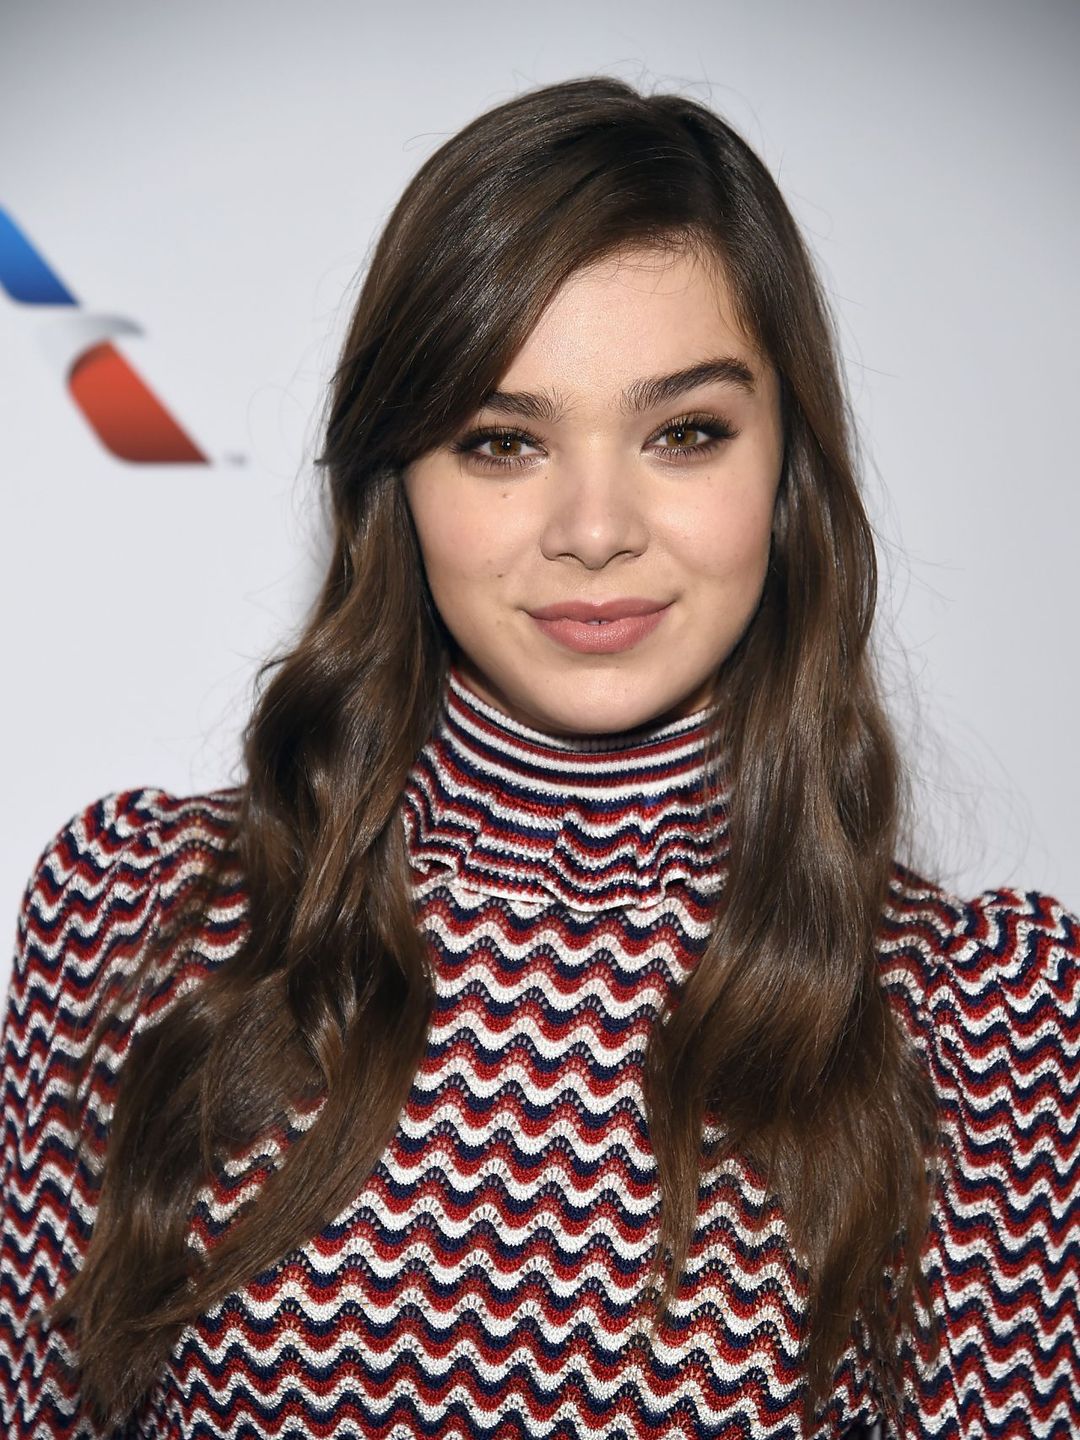 Hailee Steinfeld way to fame